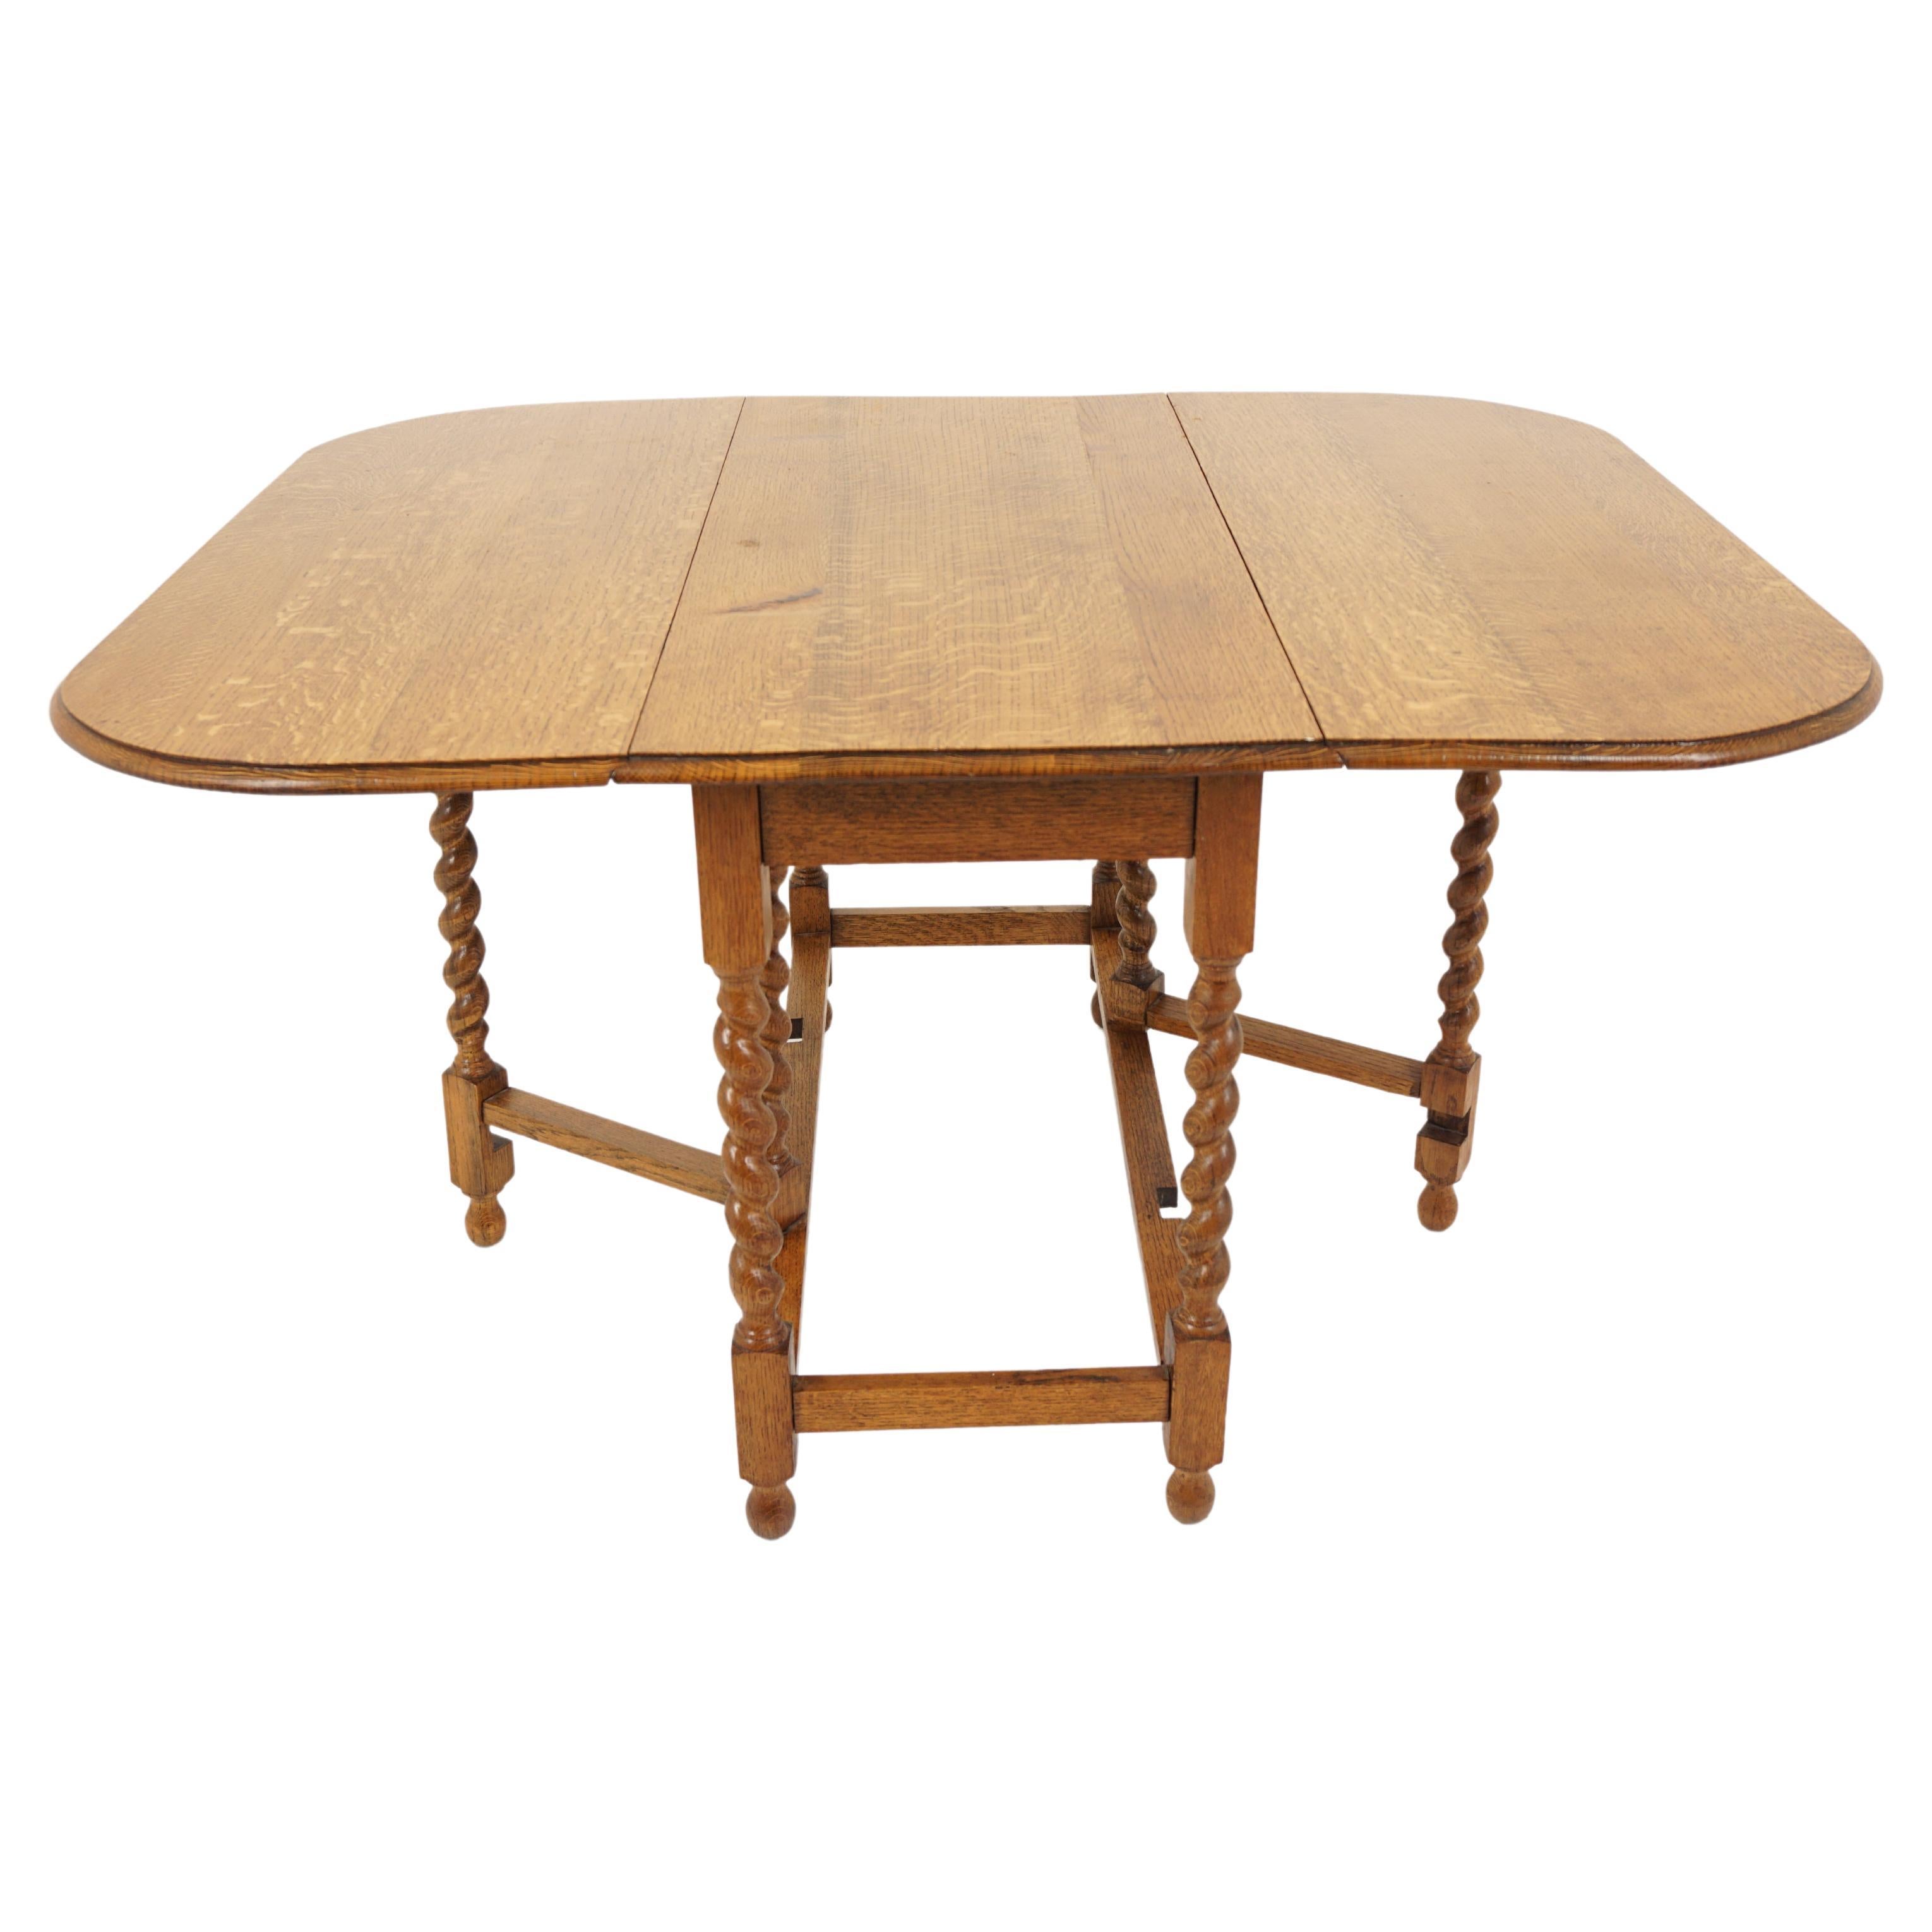 Golden tiger oak Barley Twist Gateleg, drop leaf table dining table, Scotland 1920, B2934

Scotland 1920
Solid Oak
Original Finish
Rectangular moulded top
Pair of rounded leaves on the sides
All standing on eight barley twist legs
Connected